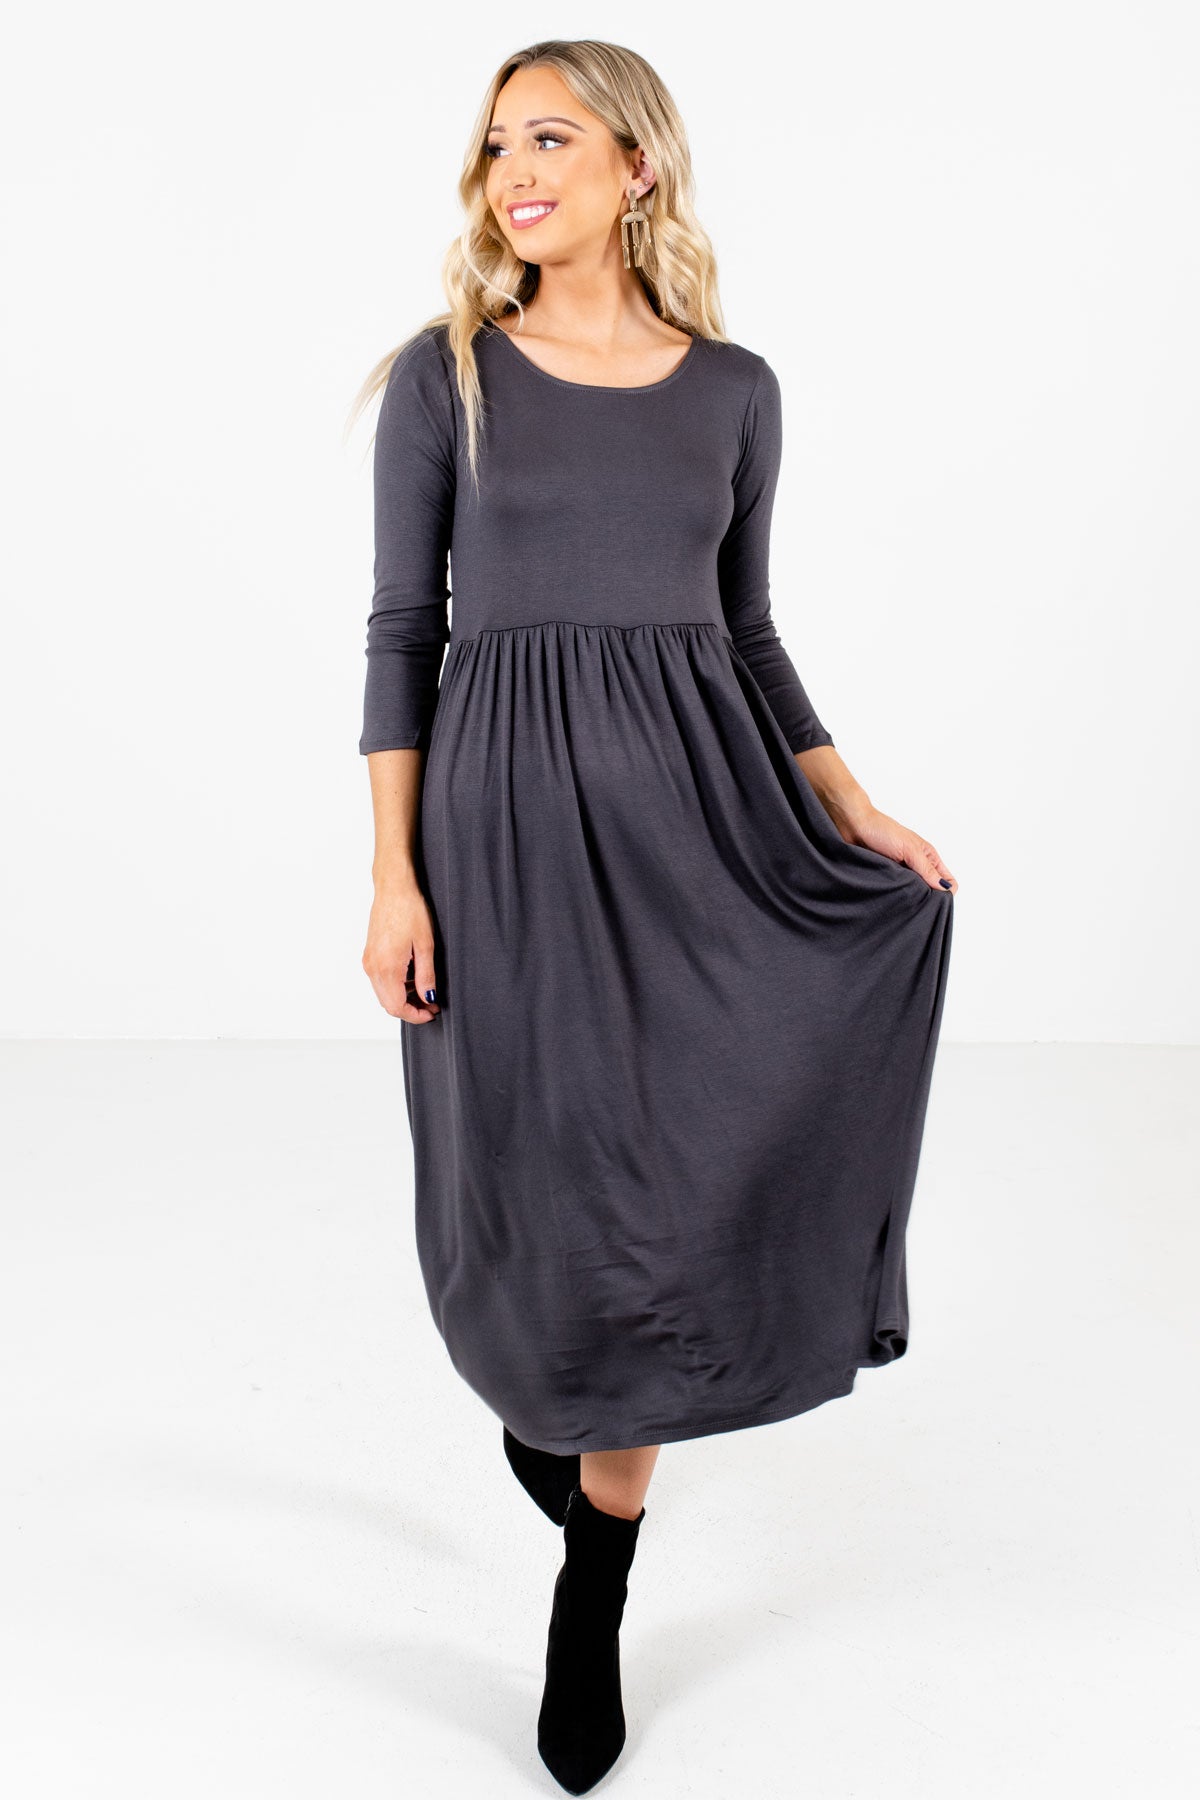 Women’s Gray High-Quality Material Boutique Midi Dress